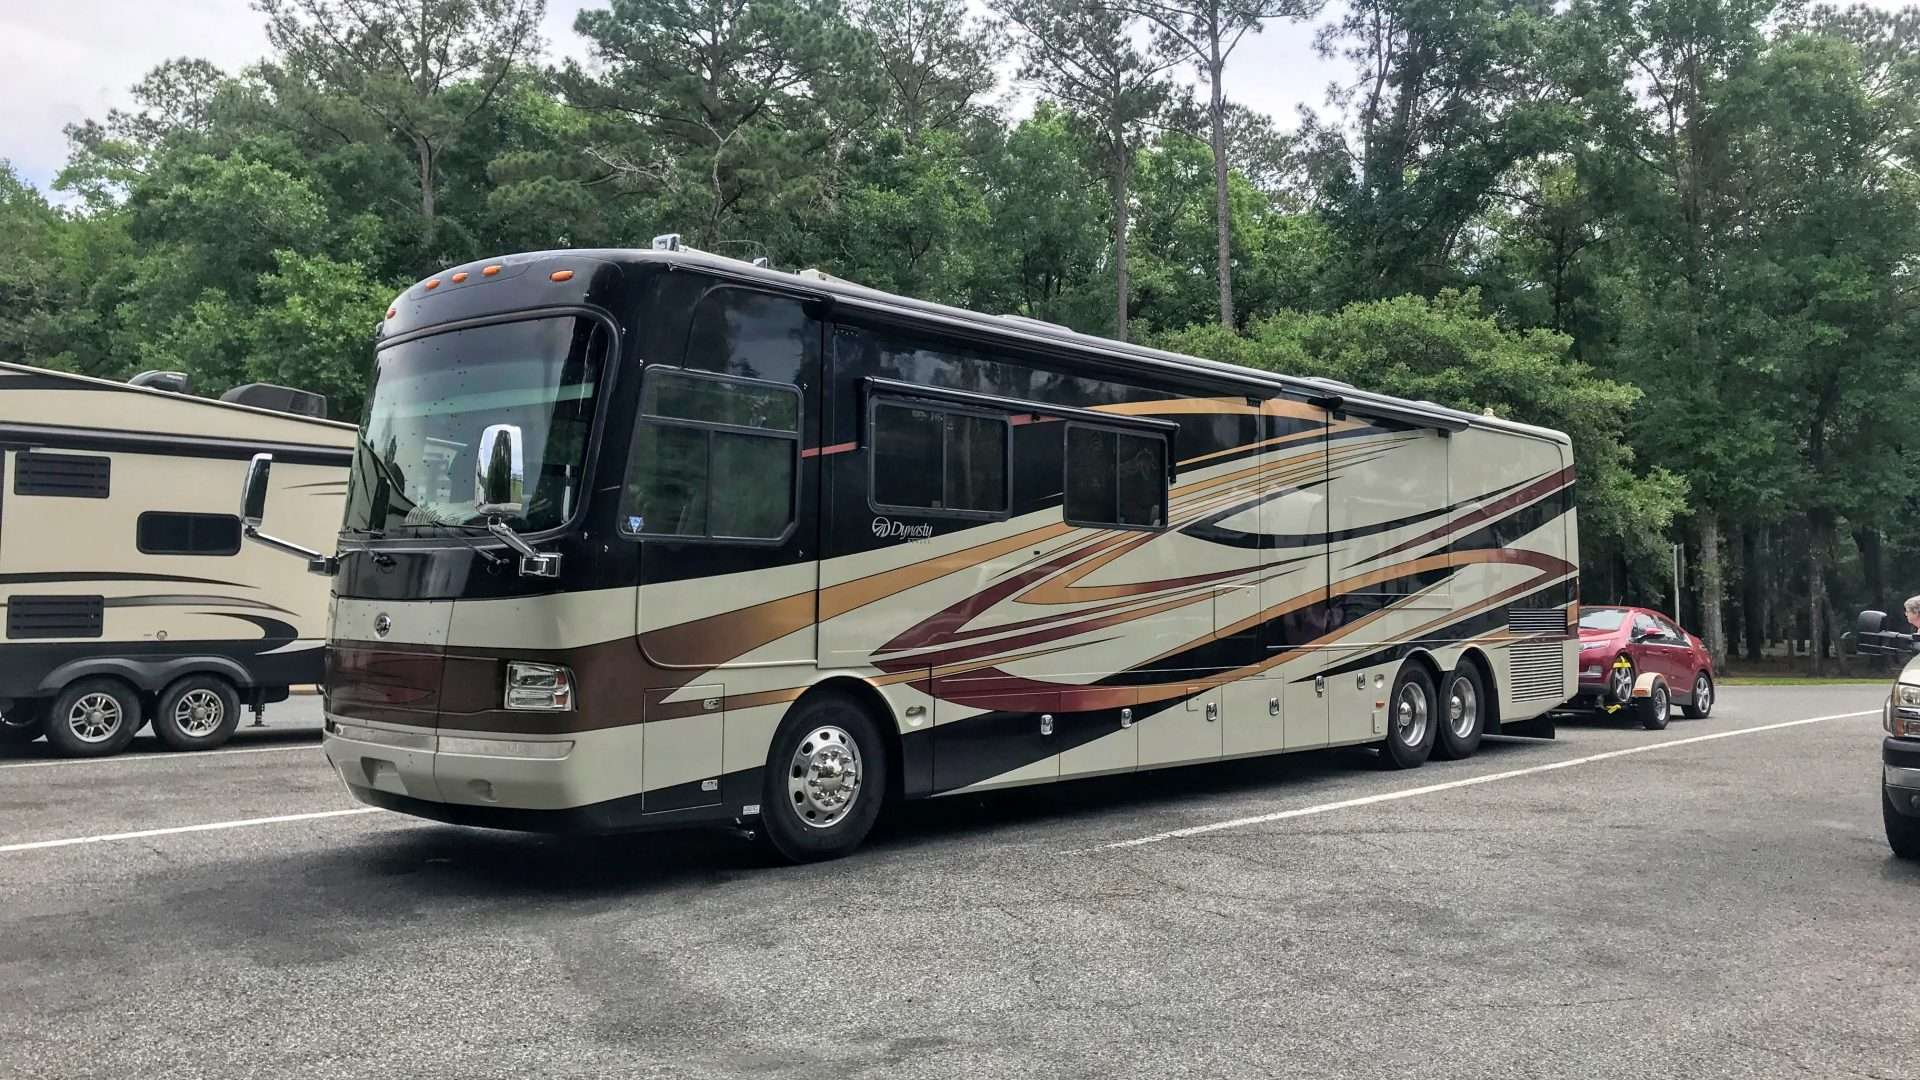 RV parked at rest stop